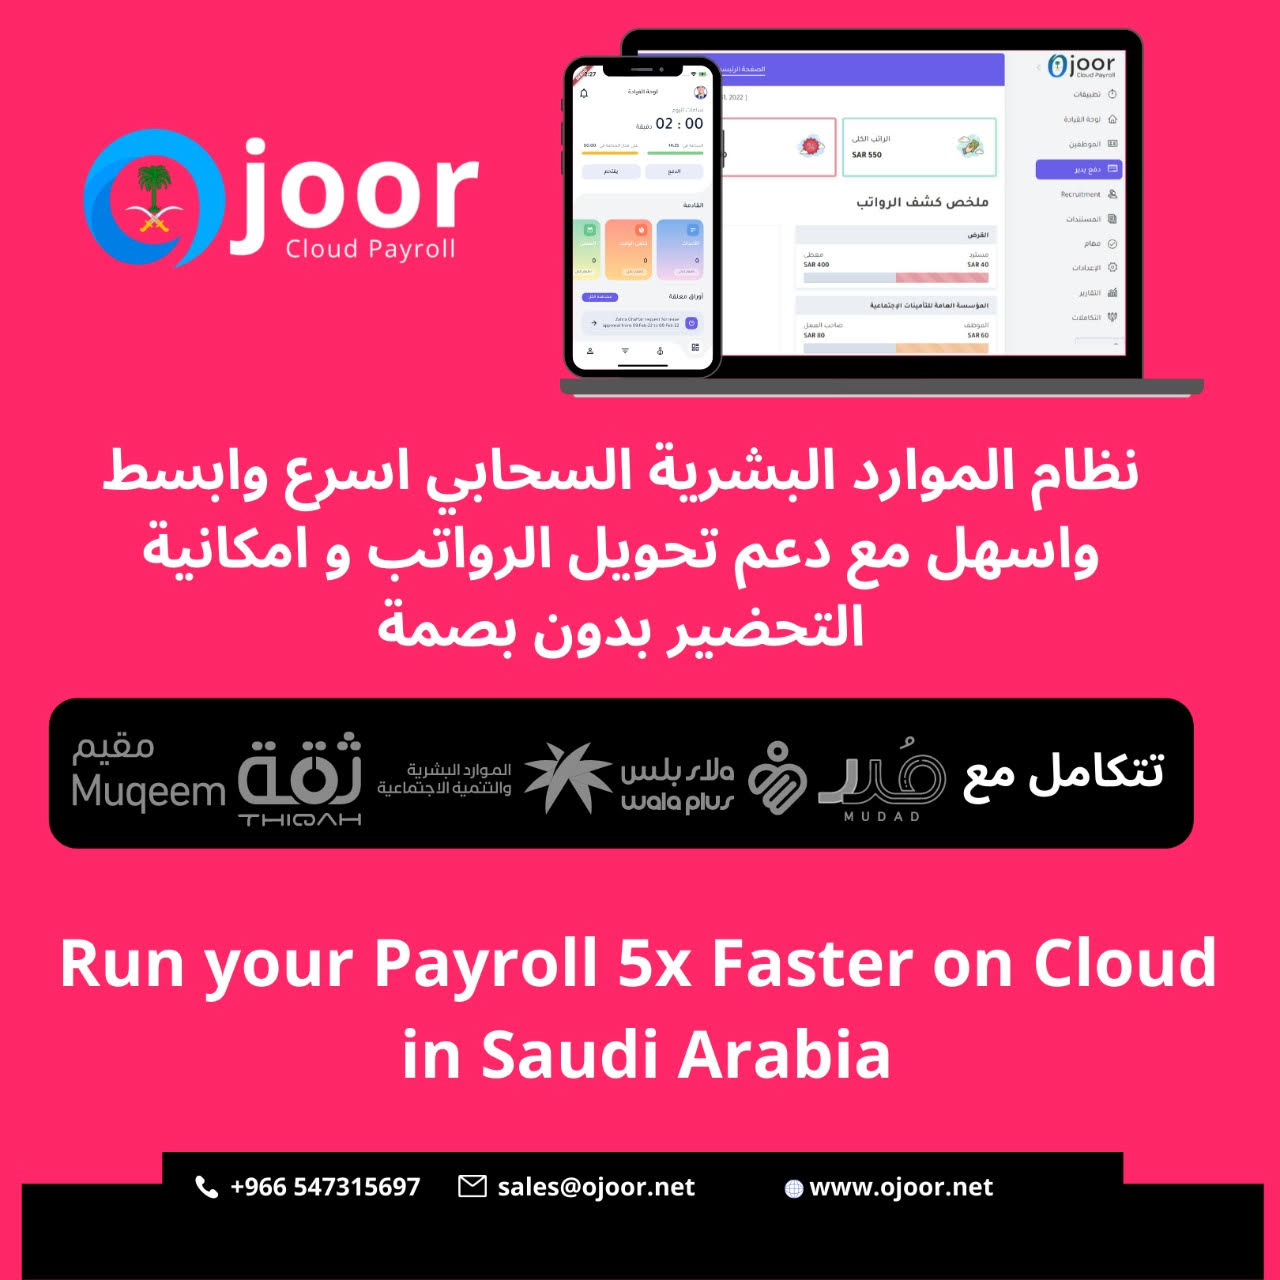 What is the Payroll for Modern Businesses in Payroll System in Saudi?